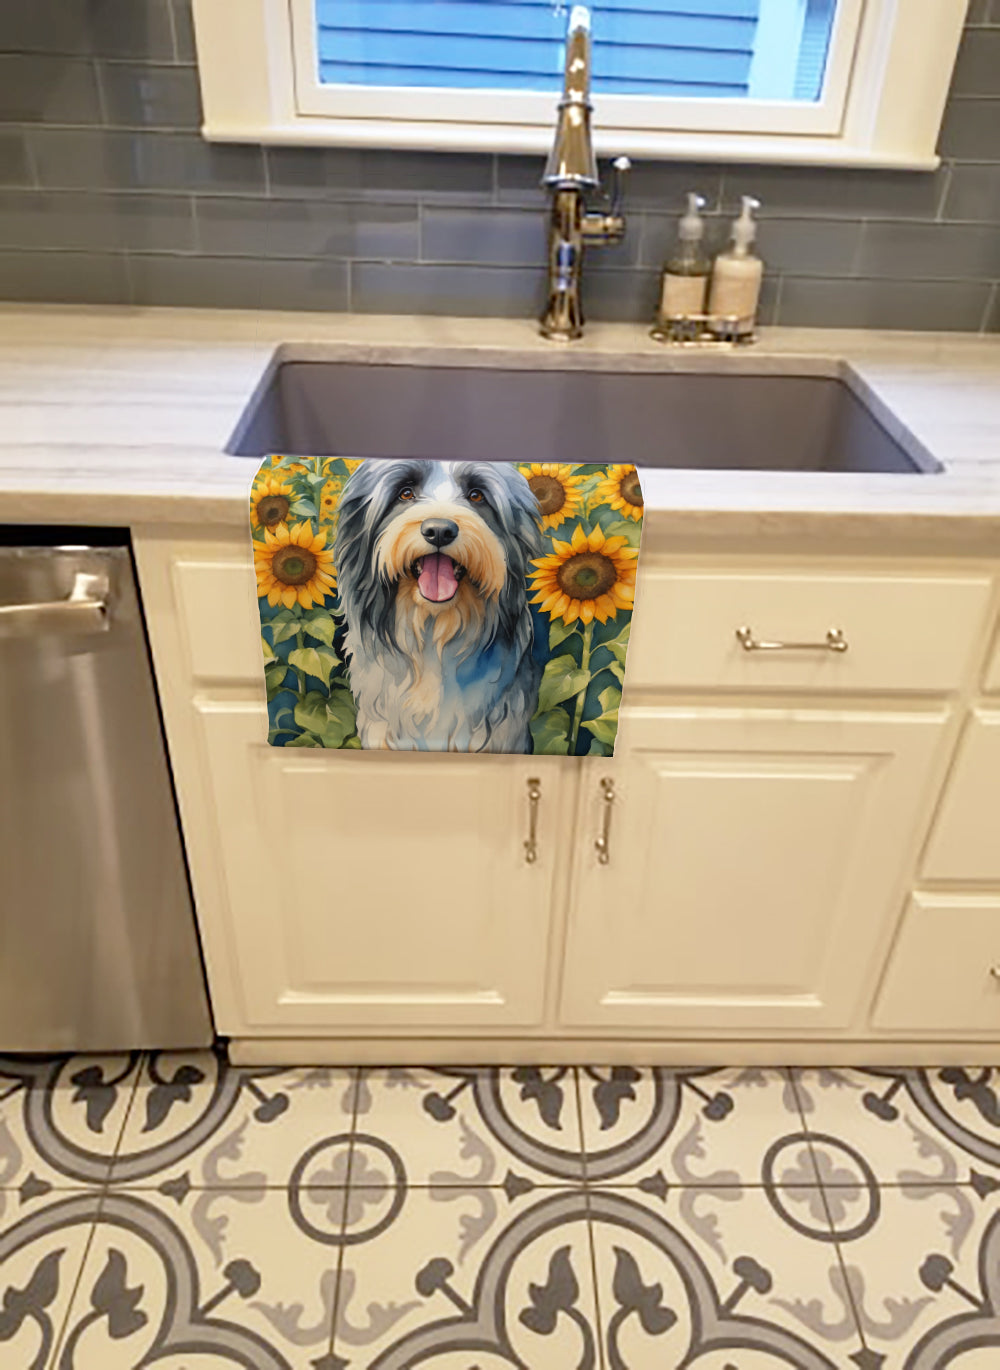 Buy this Bearded Collie in Sunflowers Kitchen Towel